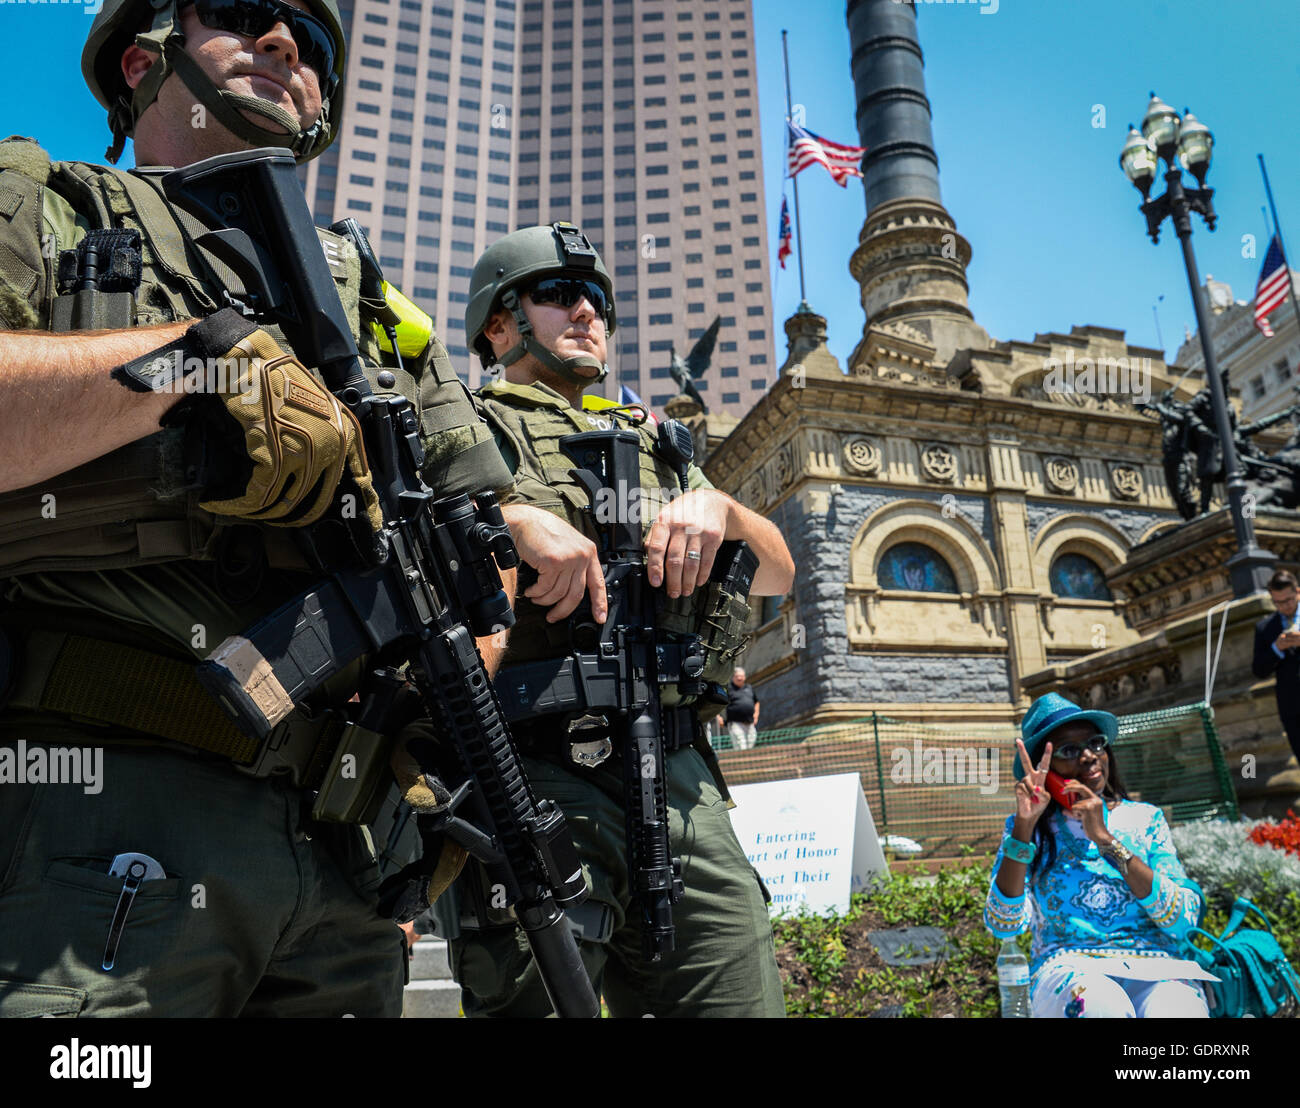 Cleveland, Ohio, USA. 19th July, 2016. Police officers watch a growing group of protesters on the Public Square during the Republican National Convention in Cleveland, Ohio © Bryan Woolston/ZUMA Wire/Alamy Live News Stock Photo